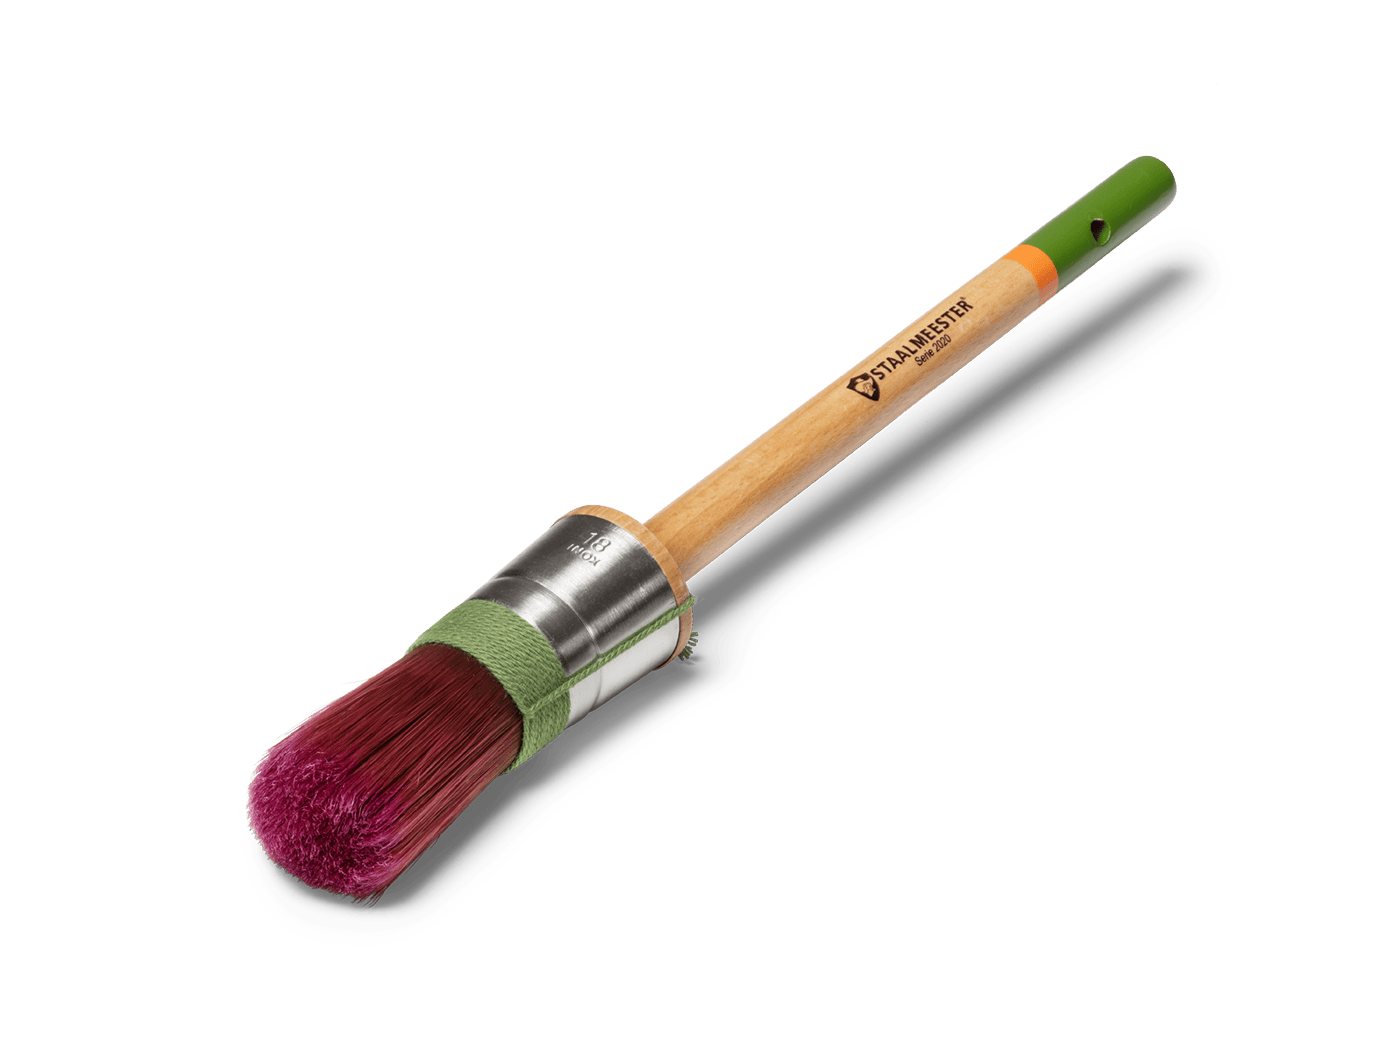 Staalmeester Round Brush 2020 from Pro-Hybrid Series available at Flip Runway"